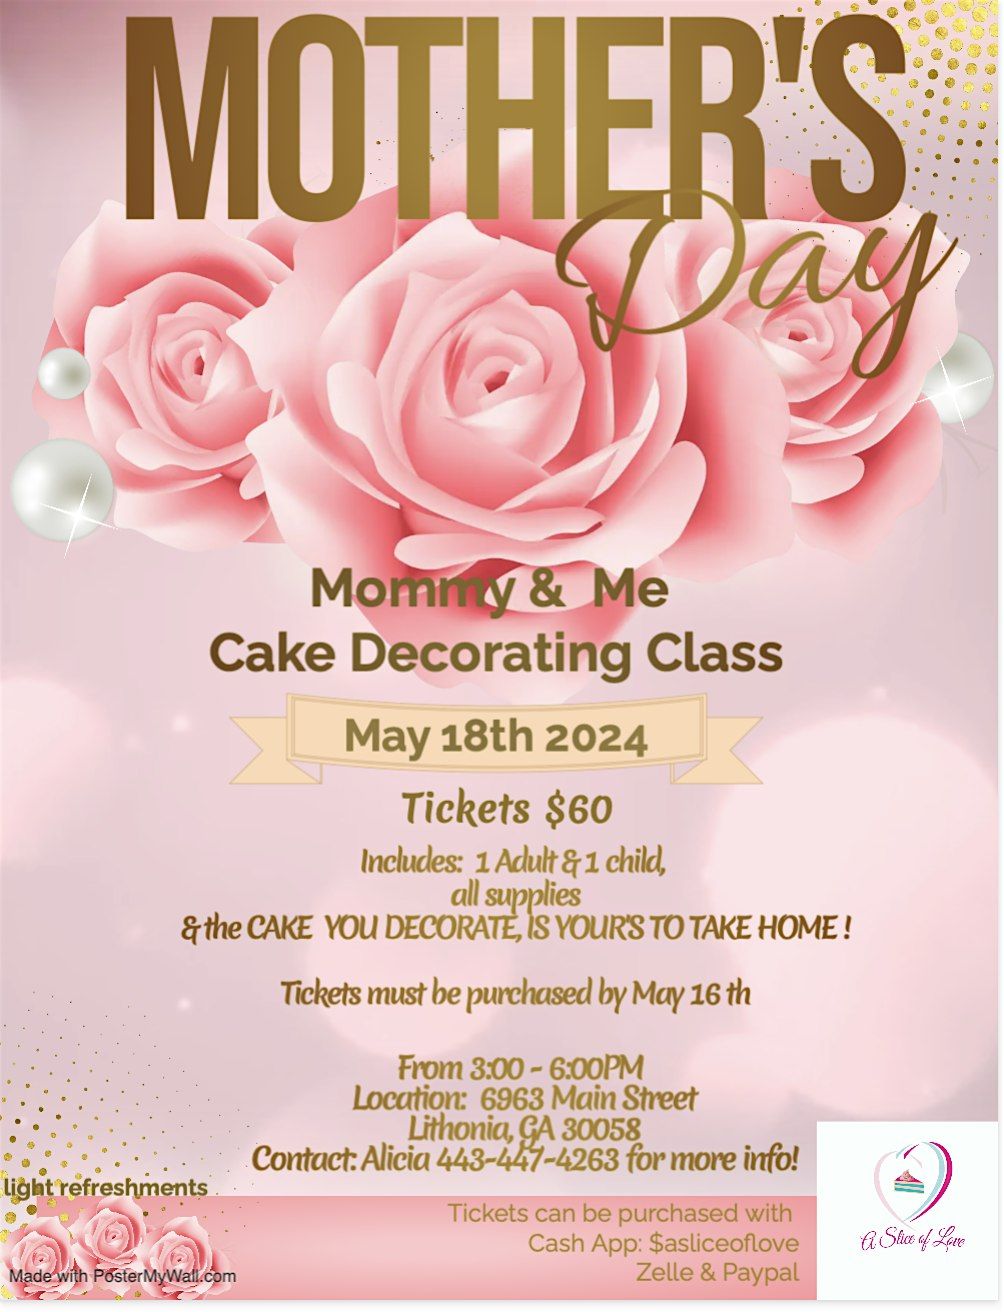 MOMMY & ME CAKE DECORATING CLASS